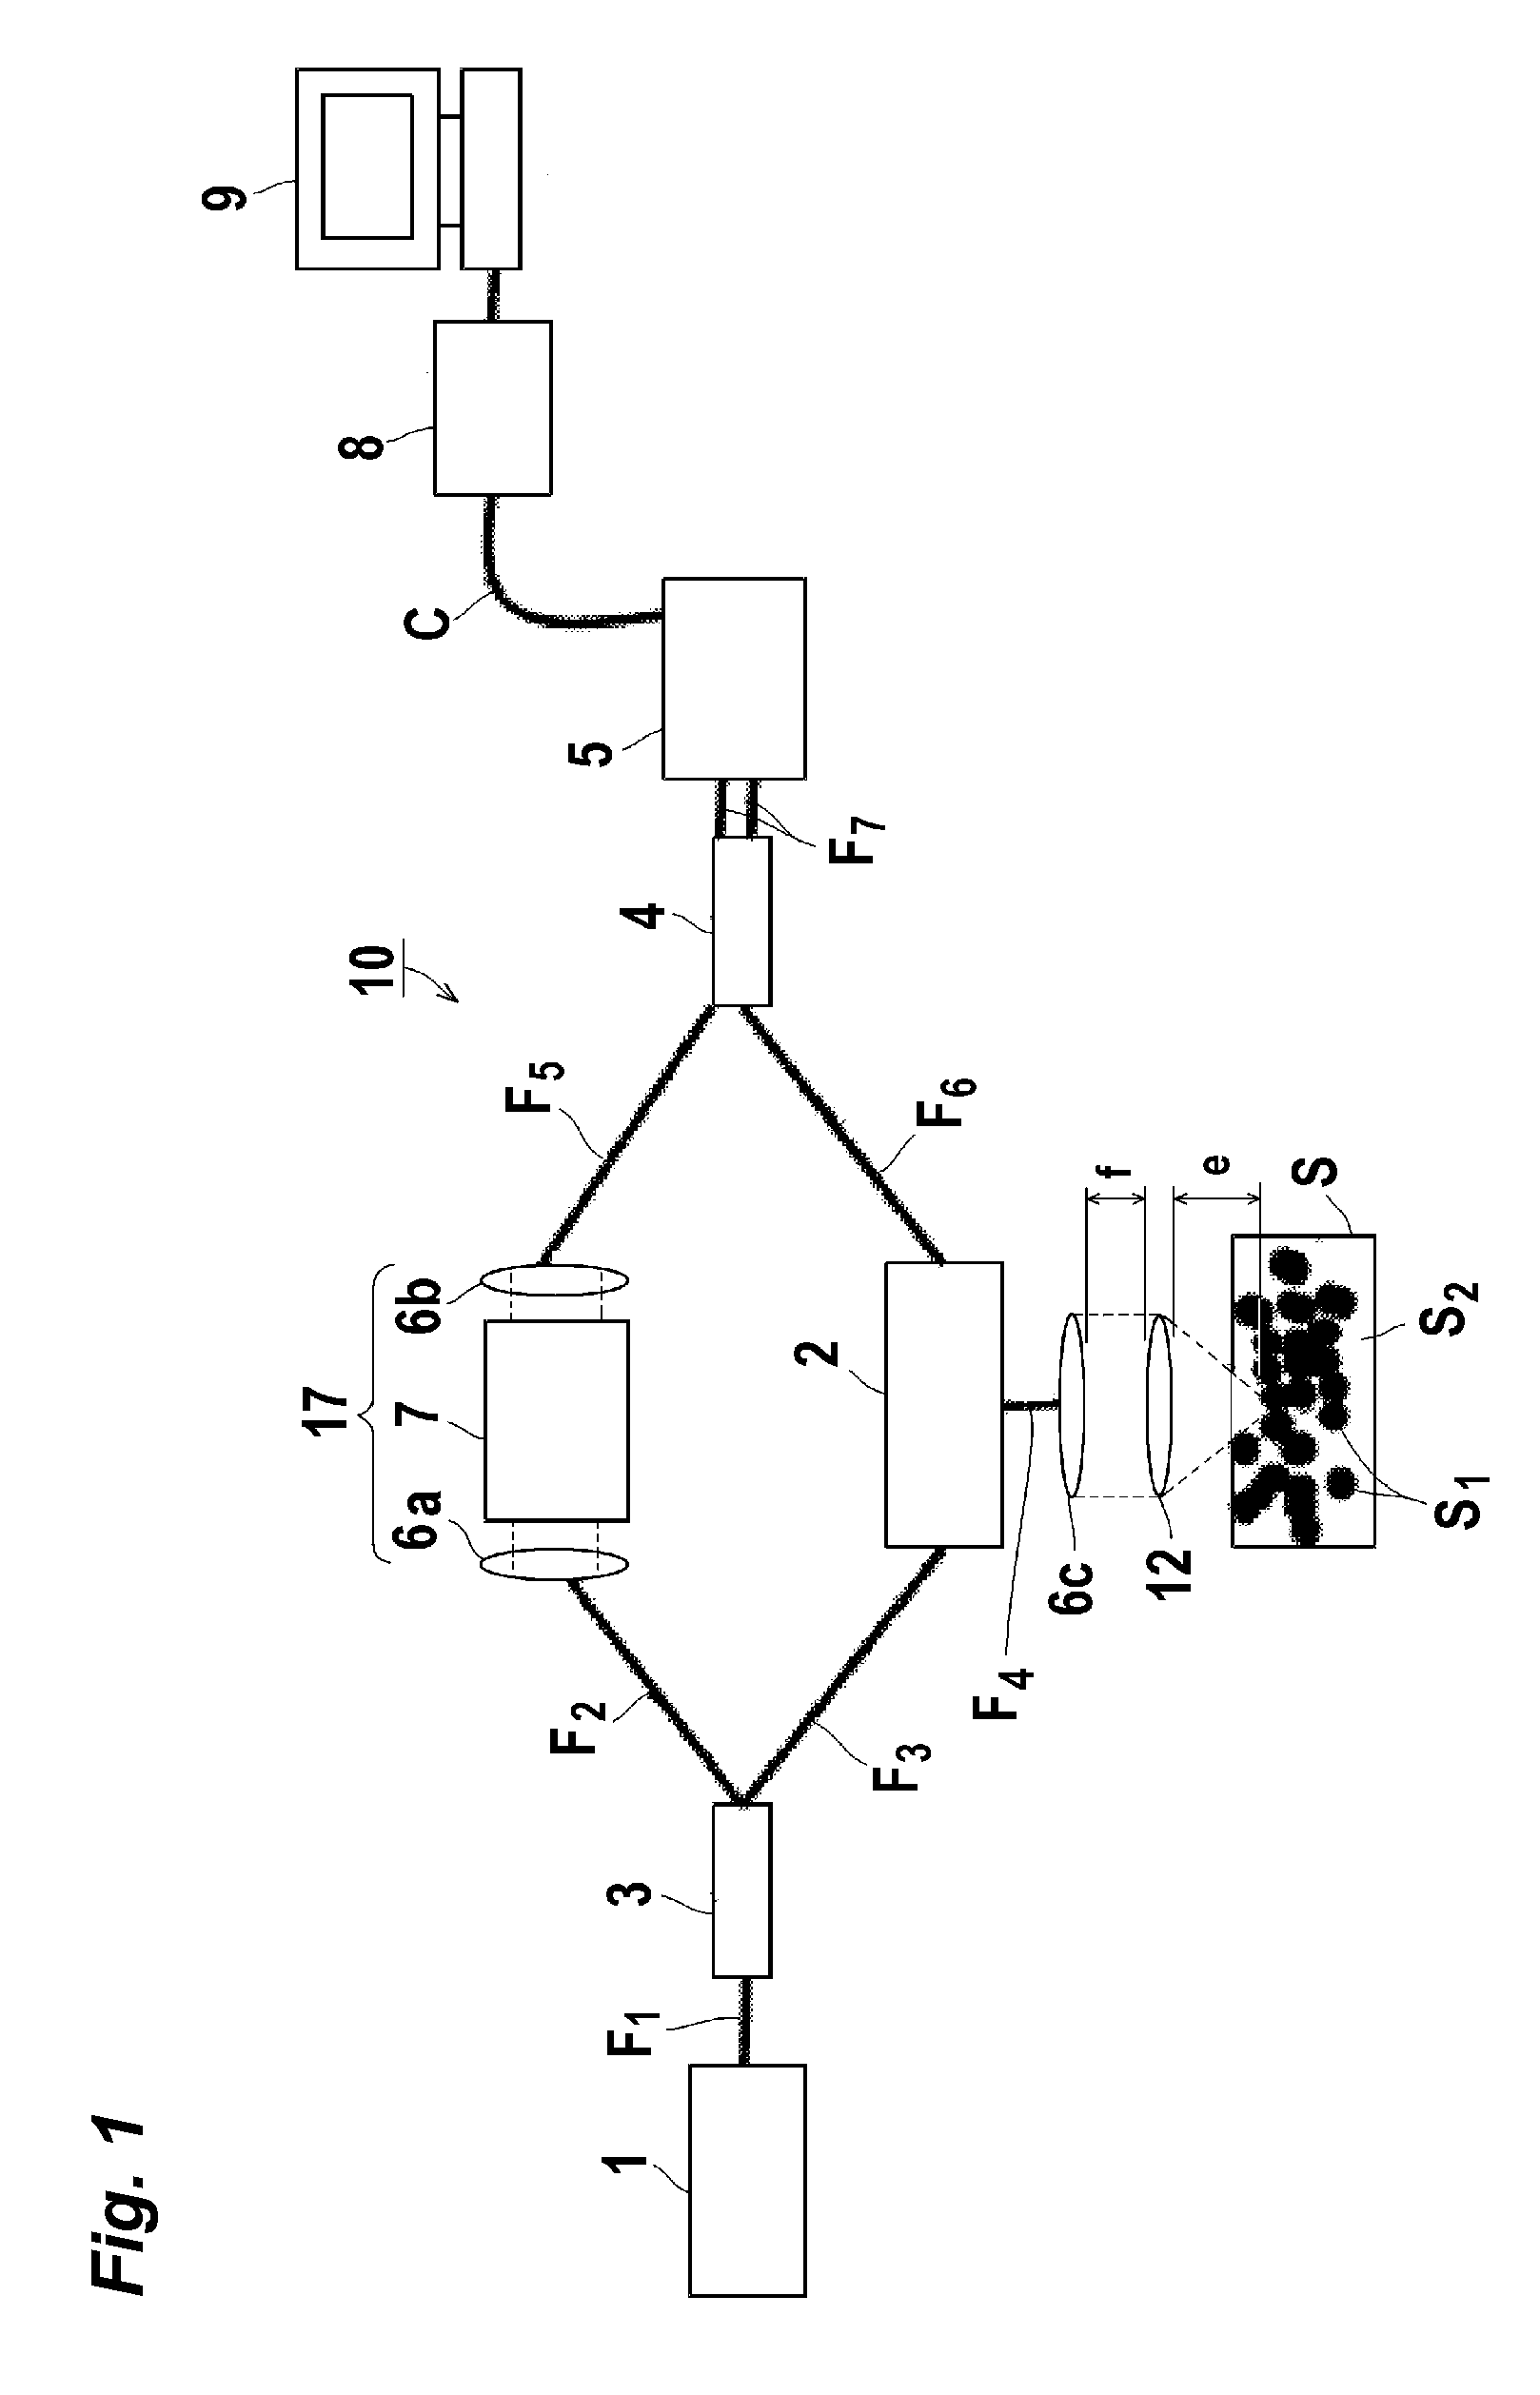 Dynamic light-scattering measuring apparatus using low-coherence light source and light-scattering measuring method of using the apparatus